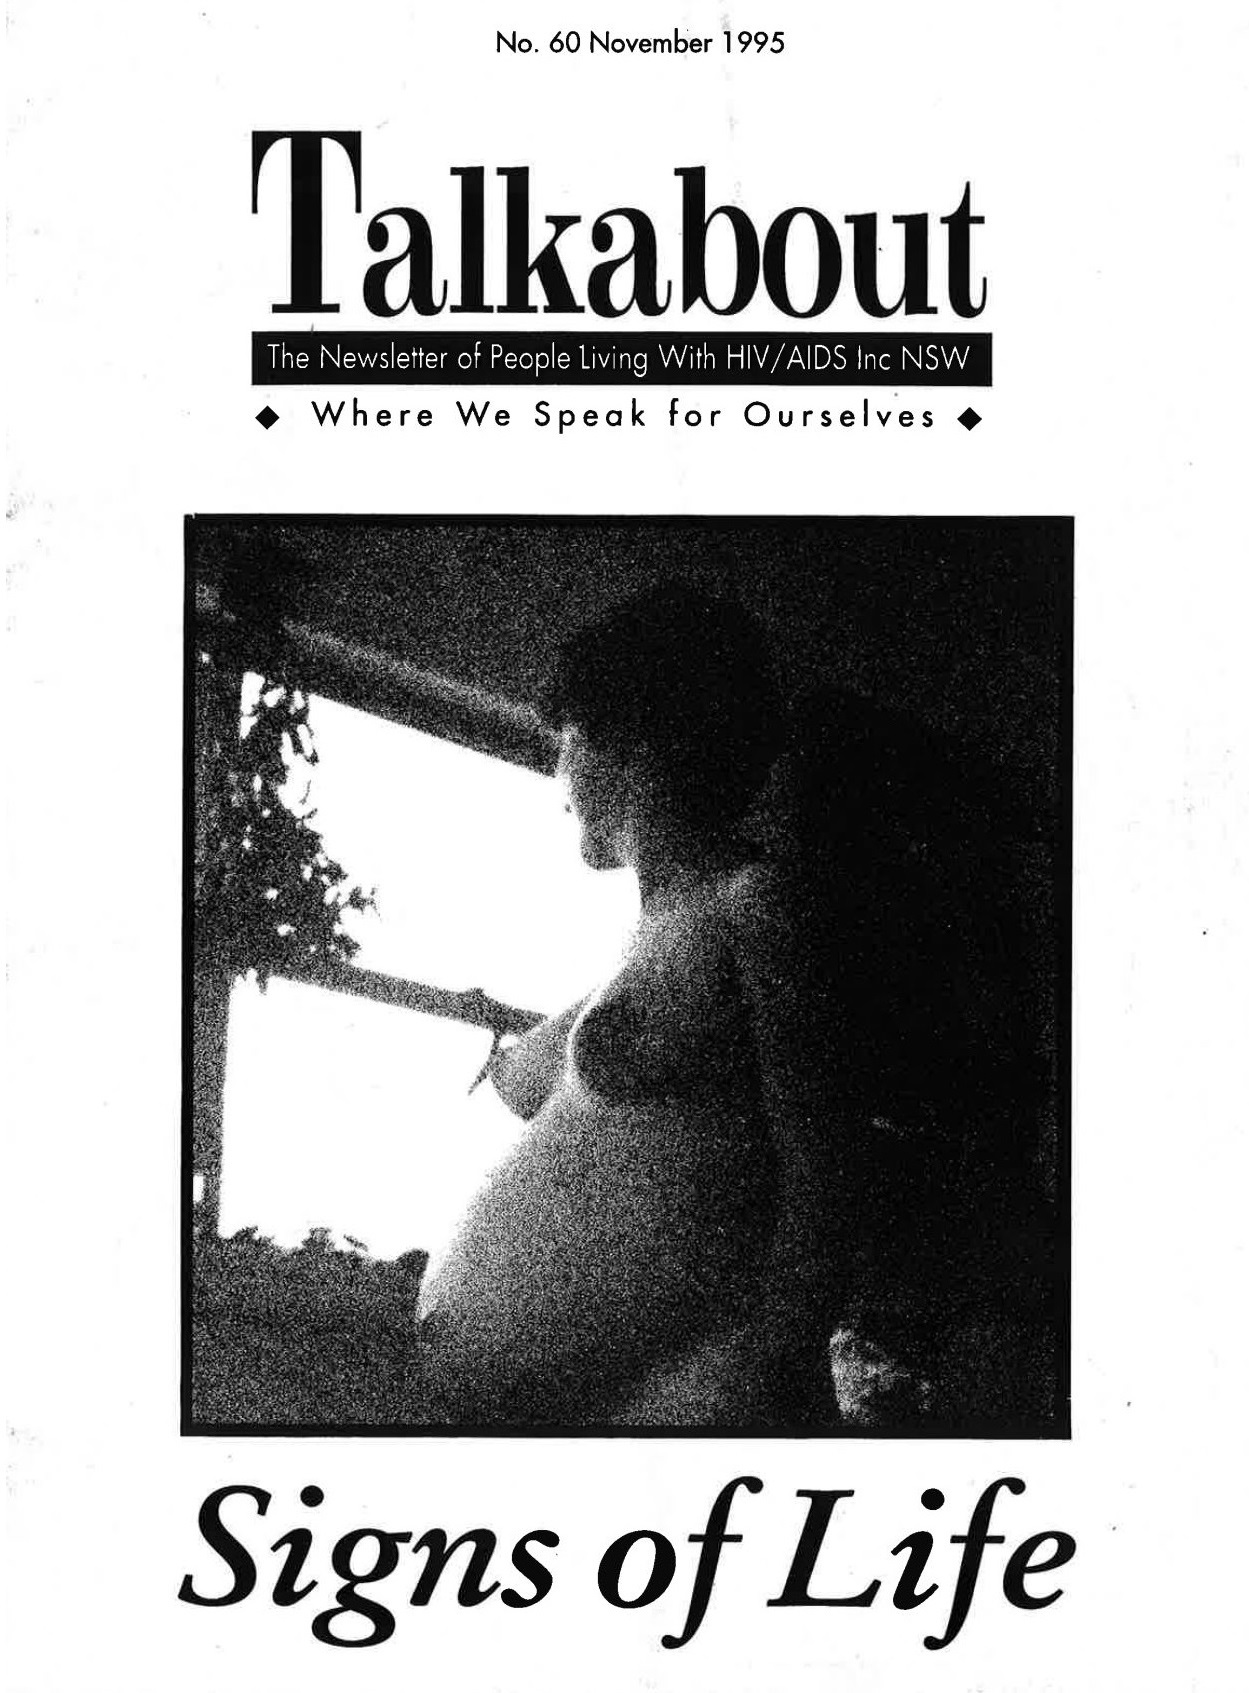 Talkabout Edition #60